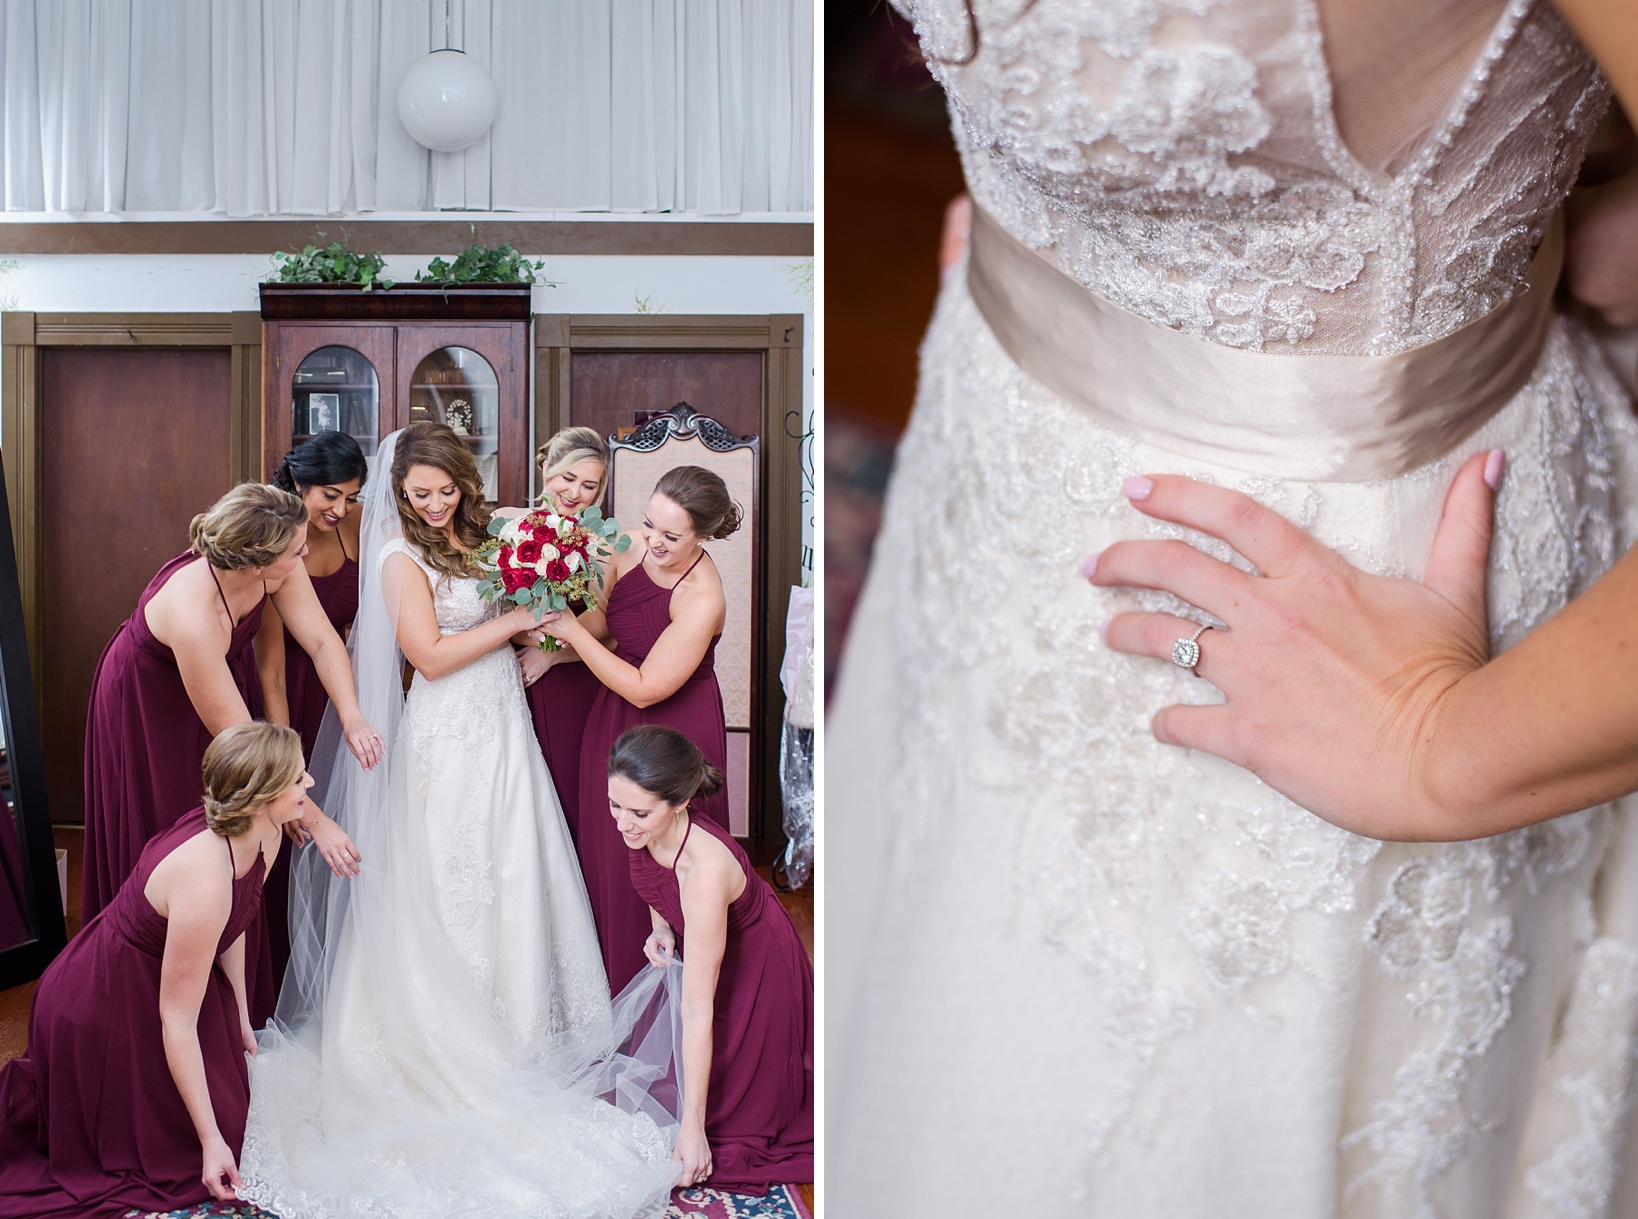 All the bridesmaids helping with the dress on the wedding day and a close up of the engagement ring on her finger